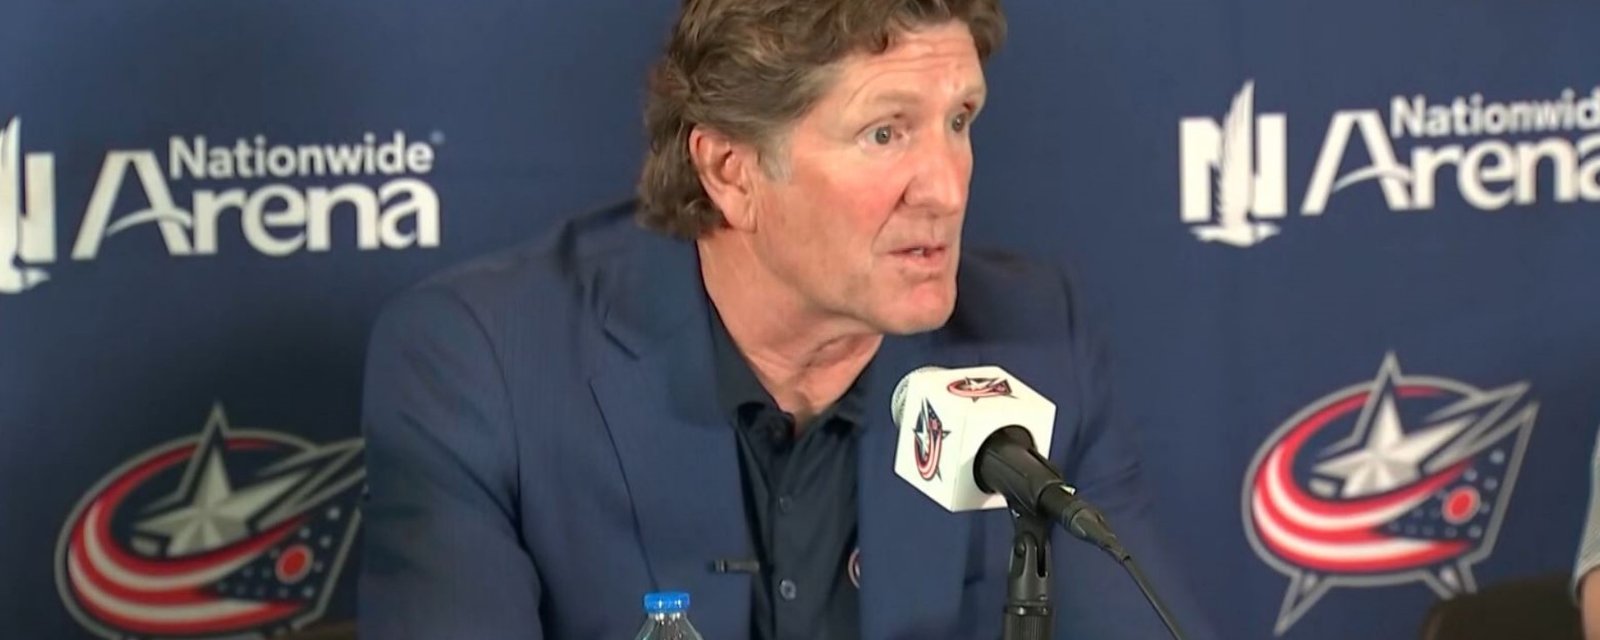 Mike Babcock’s incident and resignation to affect other coaches!